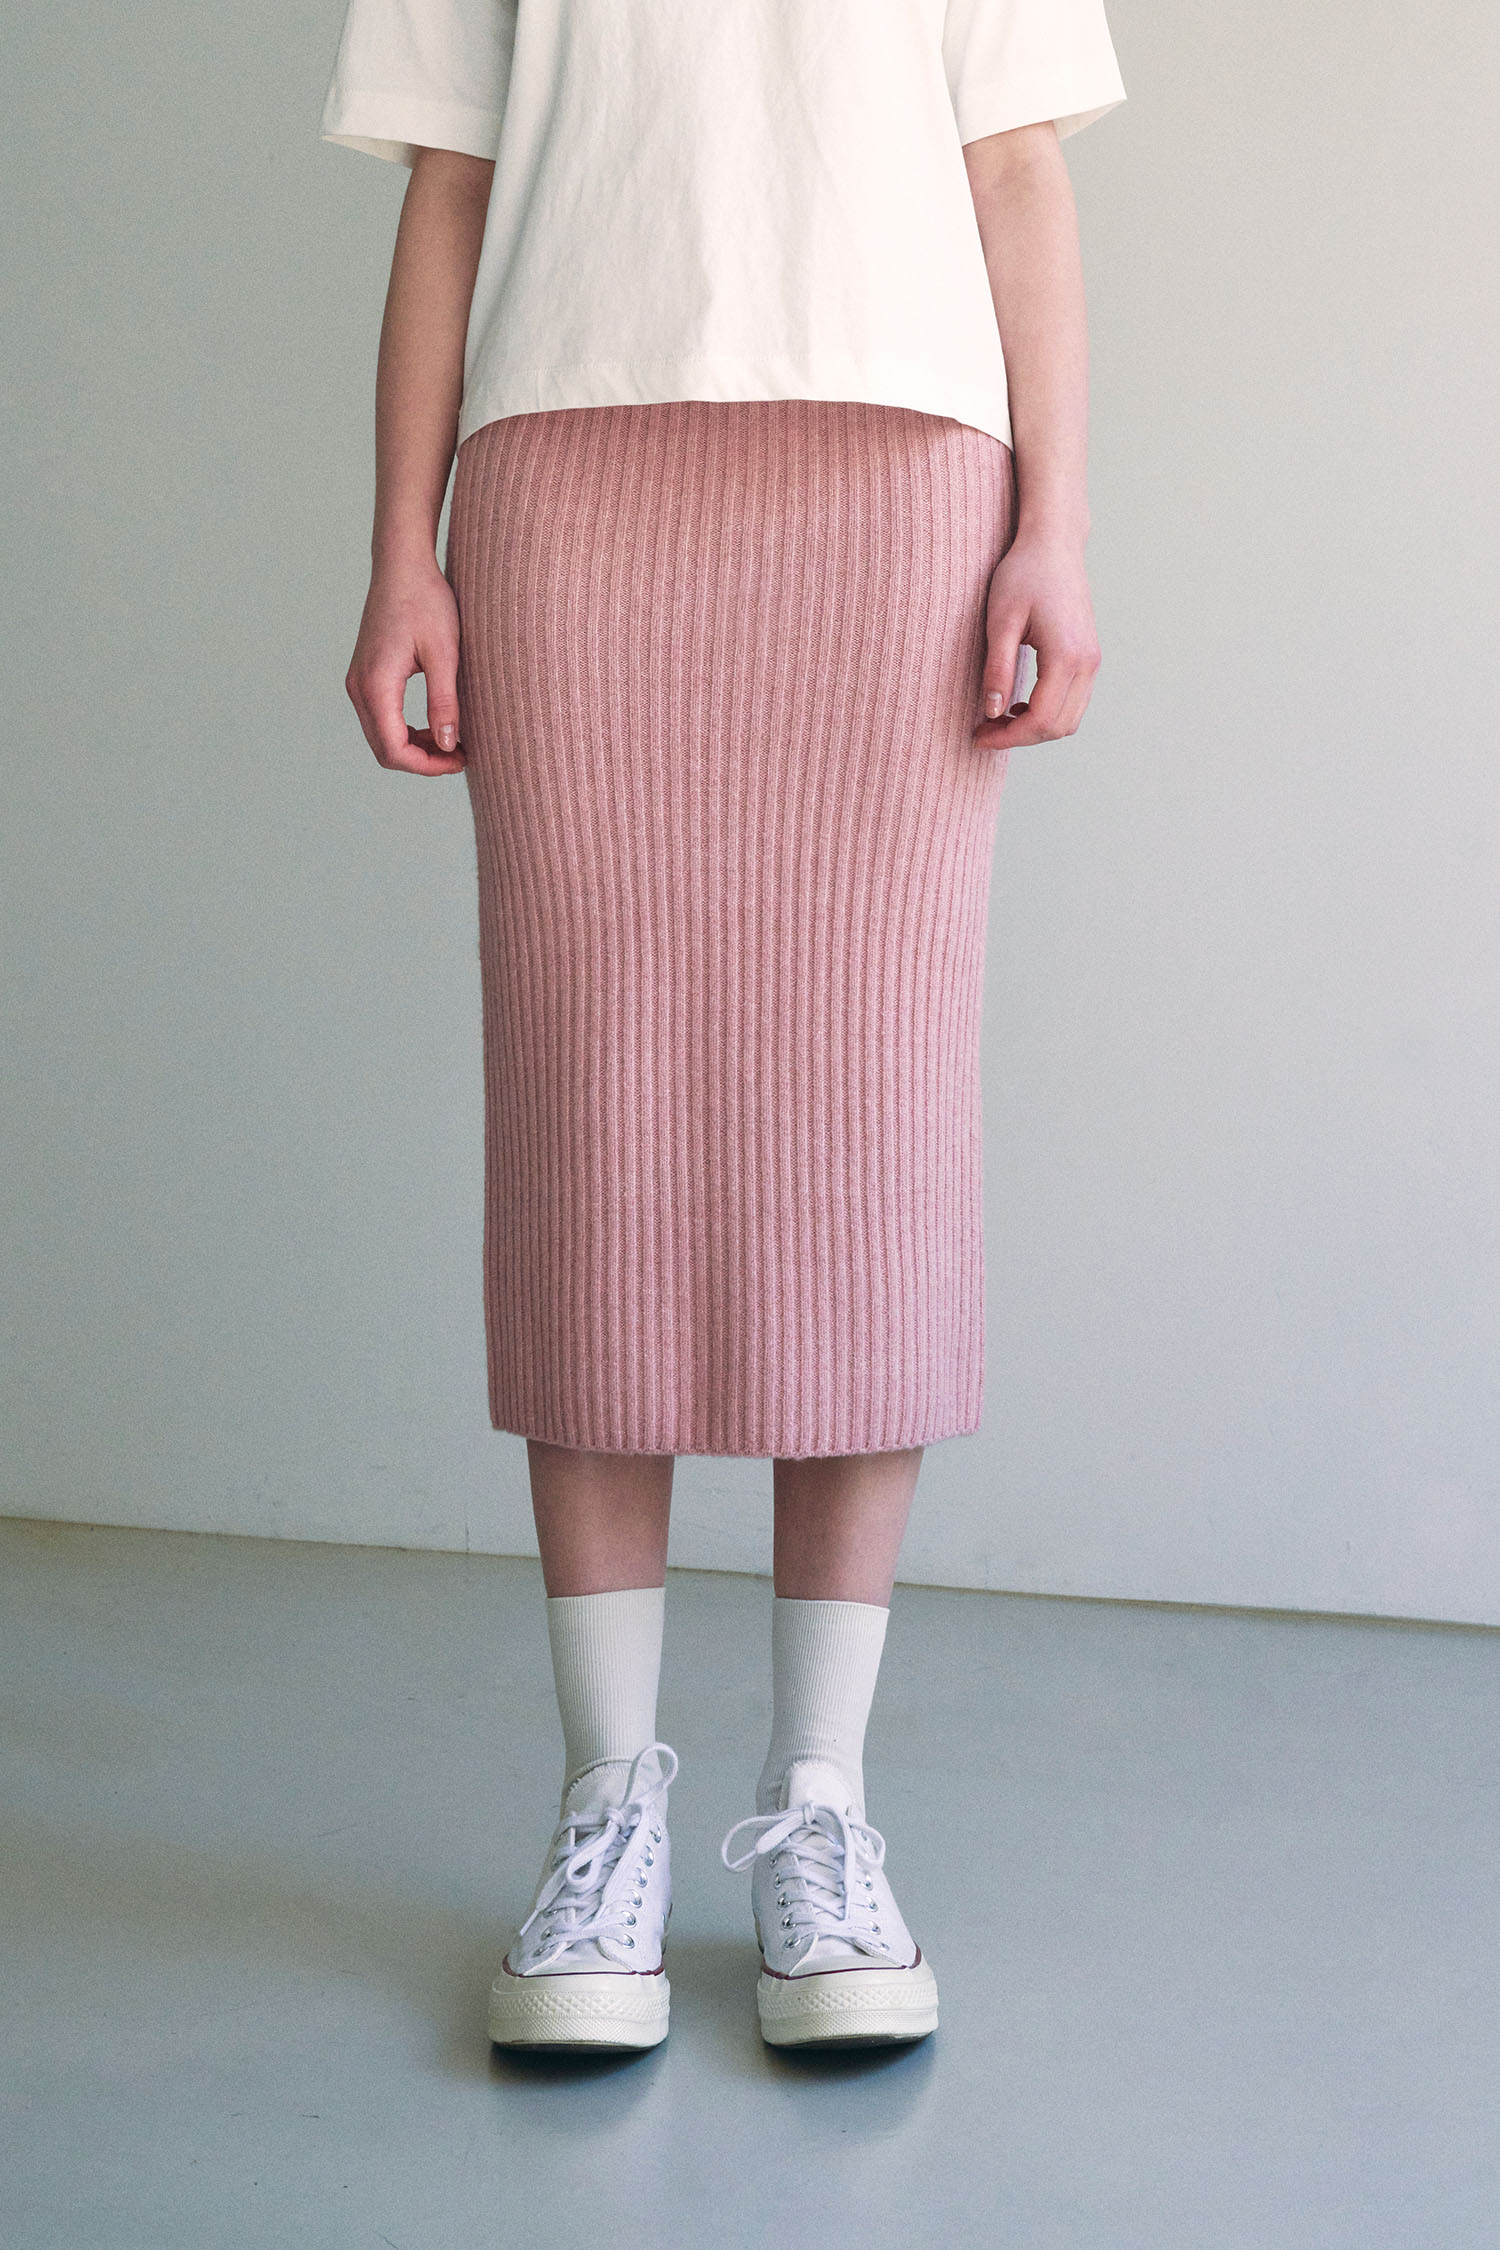 Warmth wrinkle knit skirt - pink